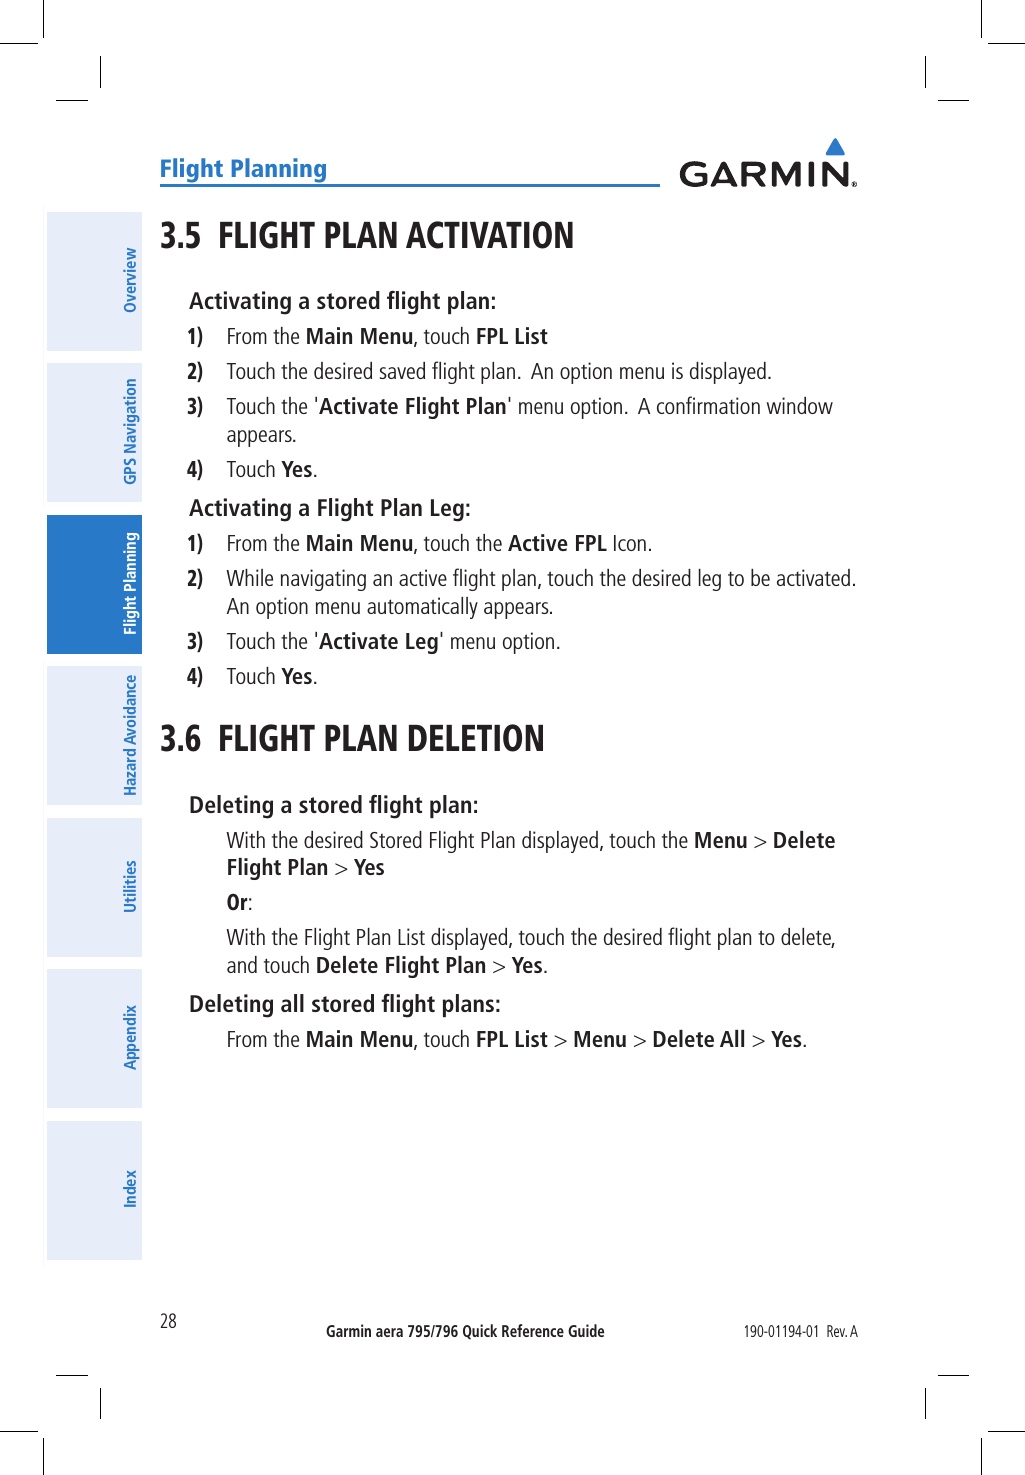 Garmin aera 795/796 Quick Reference Guide190-01194-01  Rev. A28Flight PlanningOverviewGPS NavigationFlight PlanningHazard AvoidanceUtilitiesAppendixIndex3.5  FLIGHT PLAN ACTIVATIONActivating a stored ﬂight plan:1) From the Main Menu, touch FPL List2) Touch the desired saved ﬂight plan.  An option menu is displayed.3) Touch the &apos;Activate Flight Plan&apos; menu option.  A conﬁrmation window appears.4) Touch Yes.Activating a Flight Plan Leg:1) From the Main Menu, touch the Active FPL Icon.2) While navigating an active ﬂight plan, touch the desired leg to be activated.  An option menu automatically appears.3) Touch the &apos;Activate Leg&apos; menu option.4) Touch Yes.3.6  FLIGHT PLAN DELETIONDeleting a stored ﬂight plan: With the desired Stored Flight Plan displayed, touch the Menu &gt; Delete Flight Plan &gt; Yes Or: With the Flight Plan List displayed, touch the desired ﬂight plan to delete, and touch Delete Flight Plan &gt; Yes.Deleting all stored ﬂight plans: From the Main Menu, touch FPL List &gt; Menu &gt; Delete All &gt; Yes.